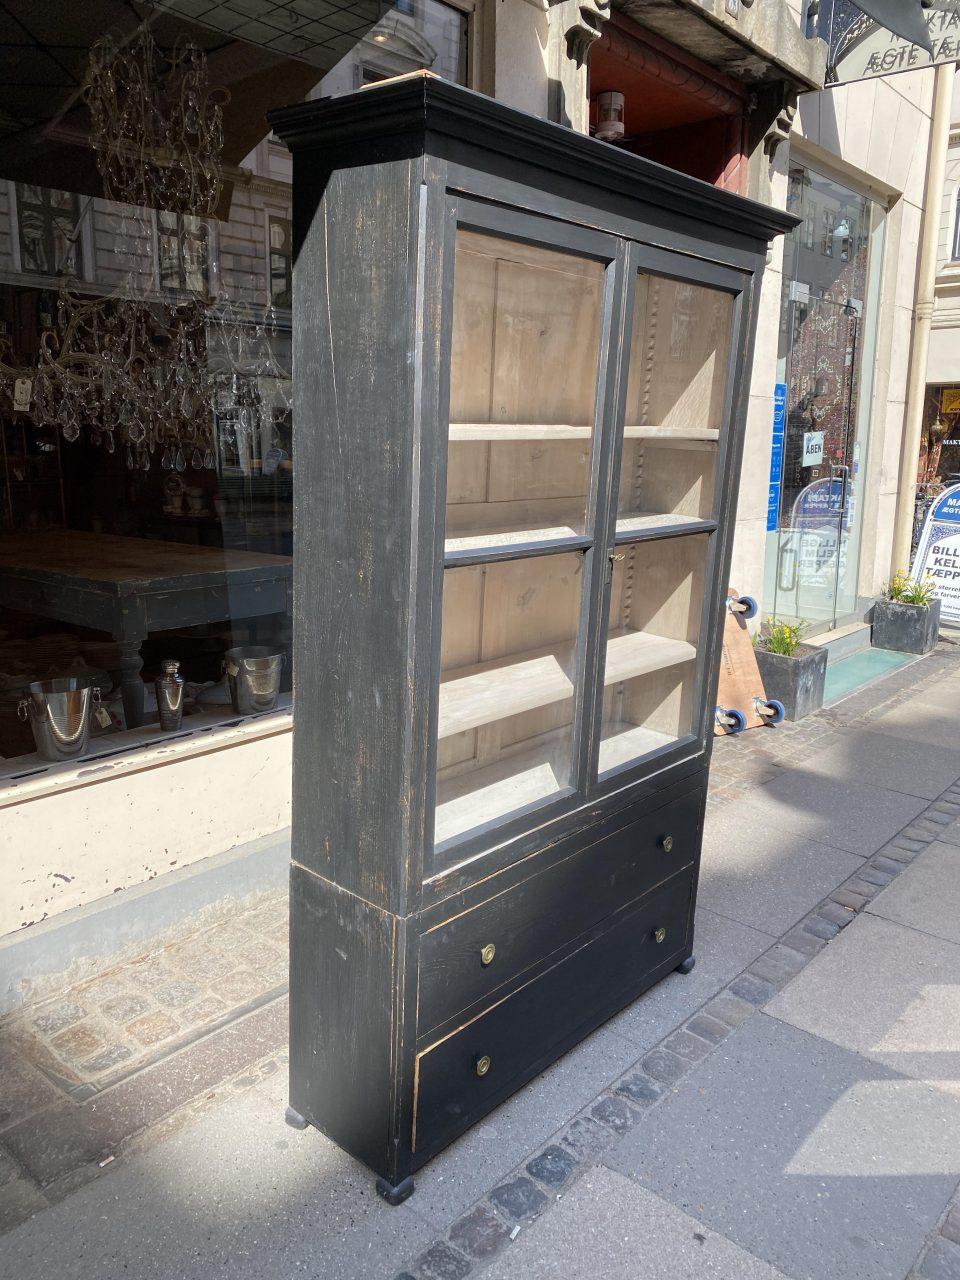 Very well-proportioned and elegant vintage 2-piece French display cabinet from the beginning of the last century. Painted a beautiful matte black, and with two tall vitrine doors in the upper part of the cabinet.

The inside of the cabinet is